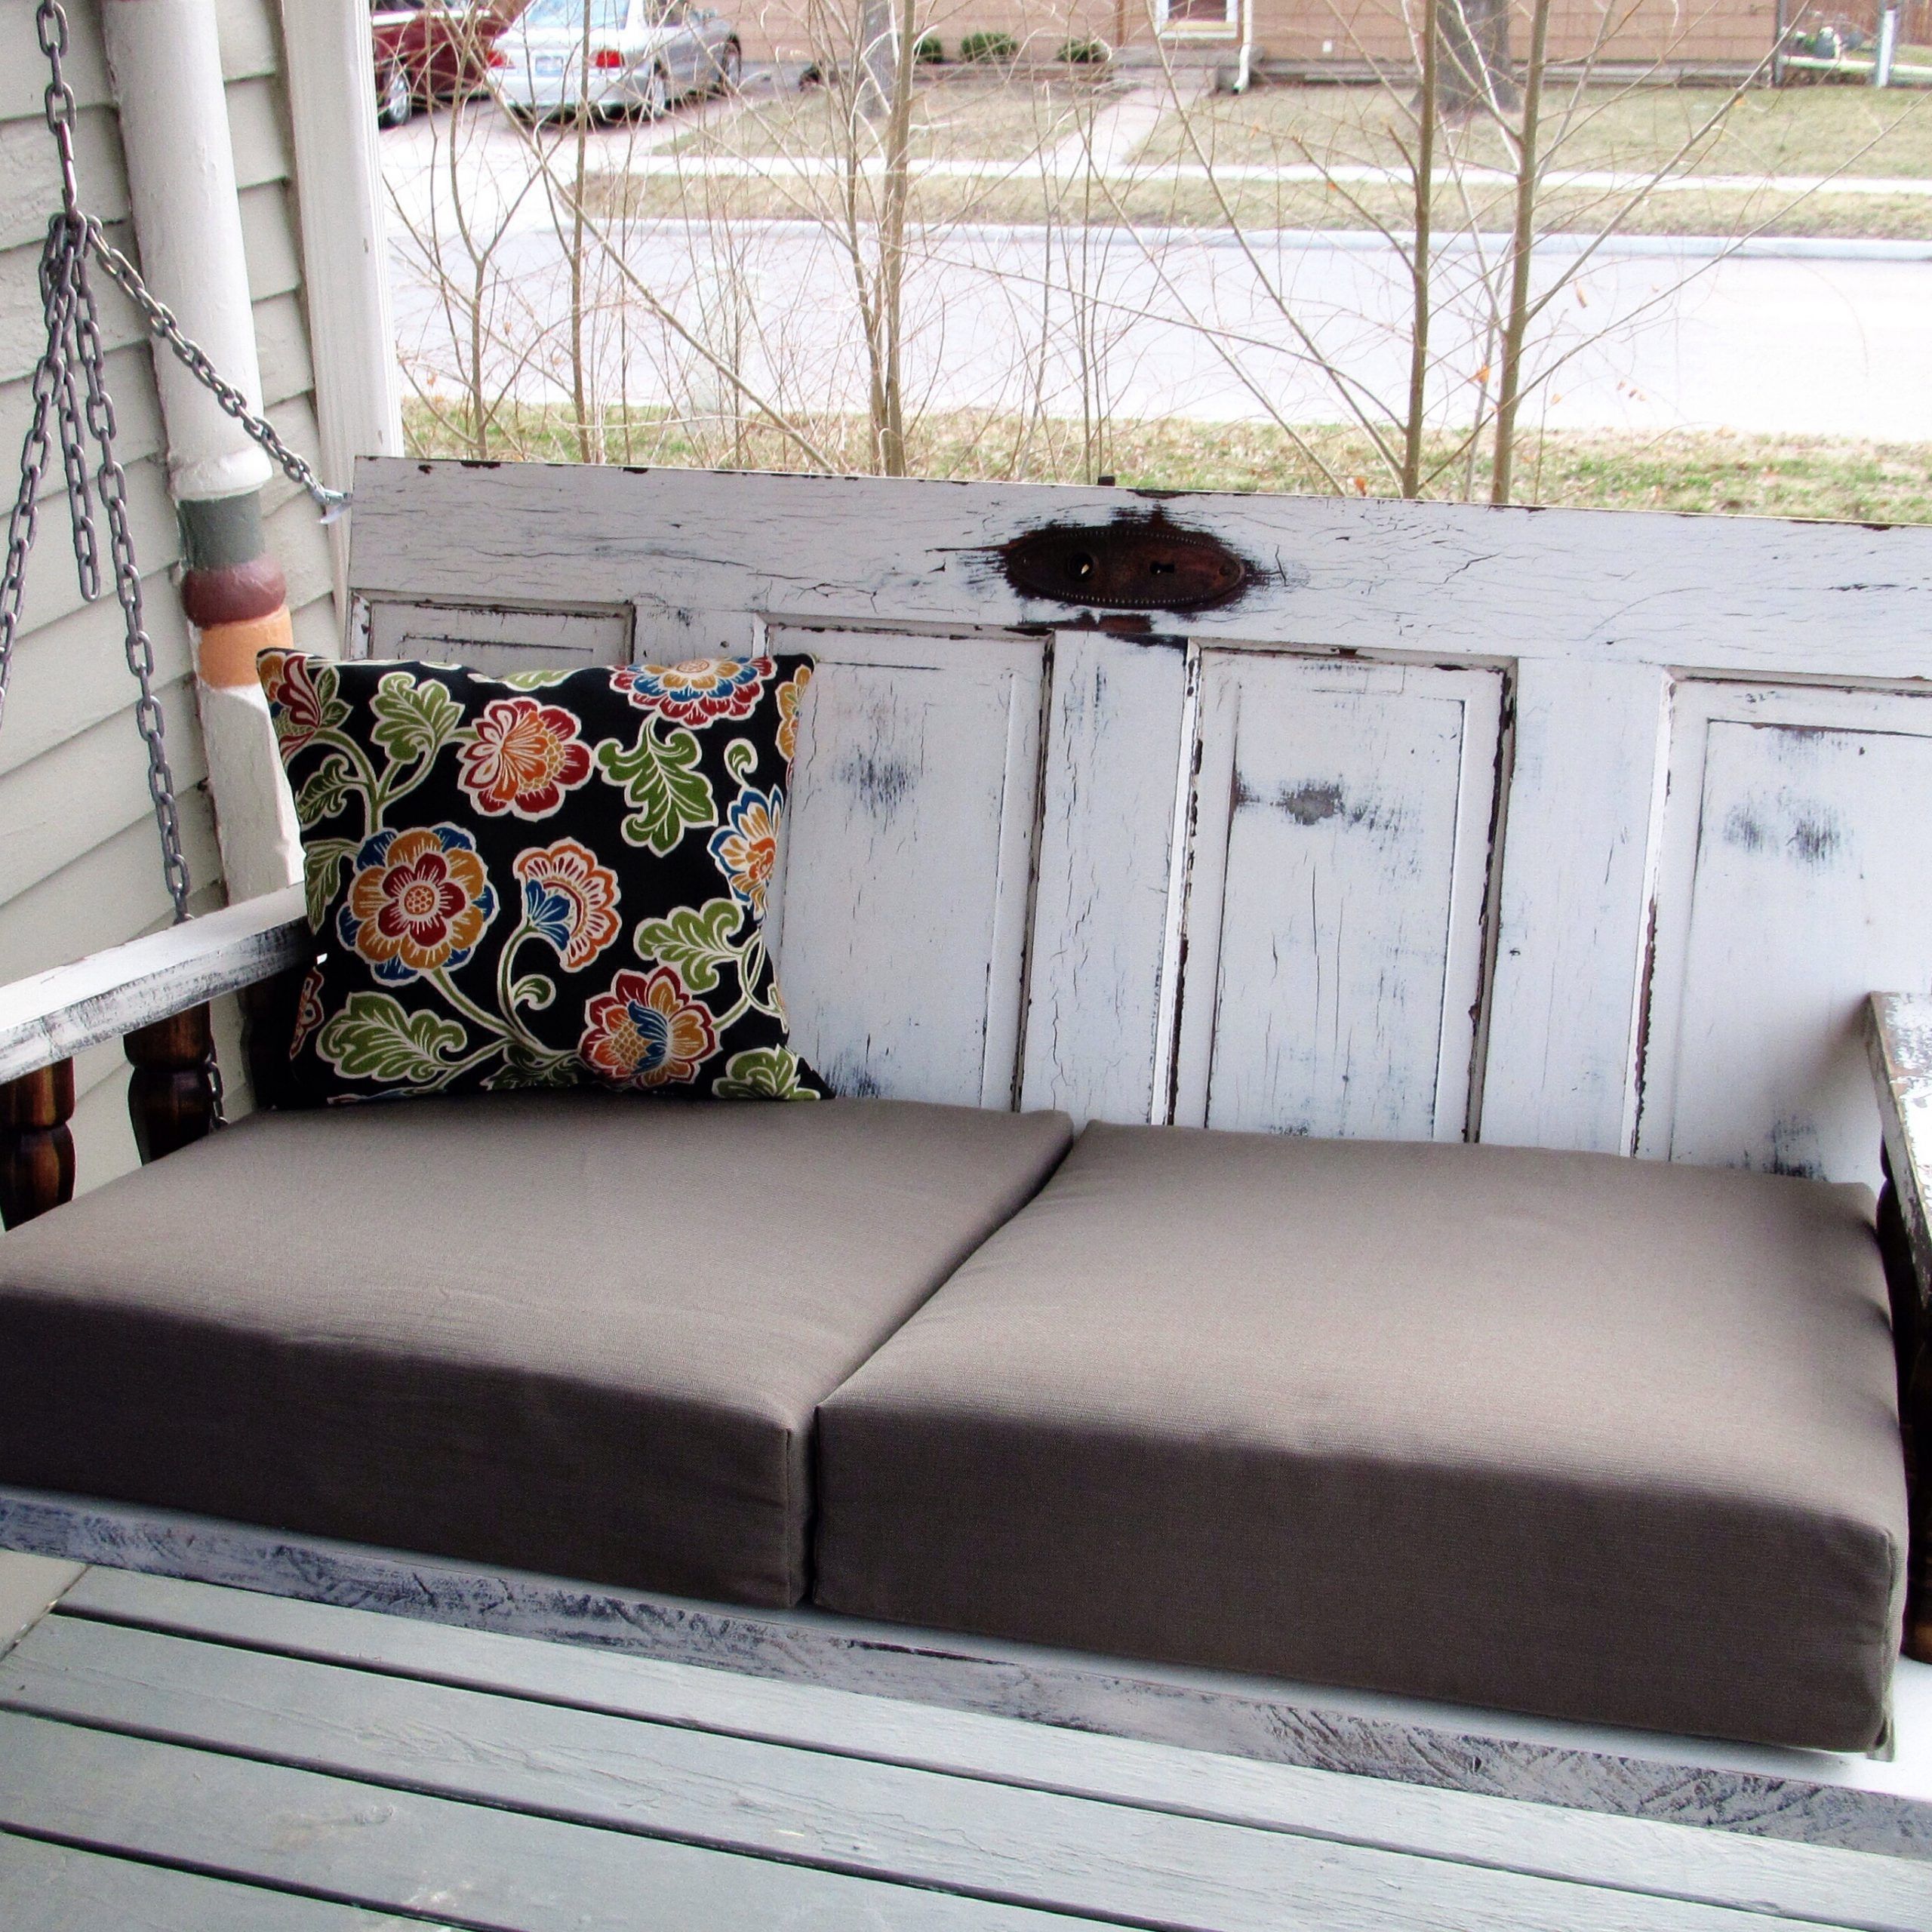 Porch Swings For Favorite Images Of Front Porch Swings (View 8 of 30)